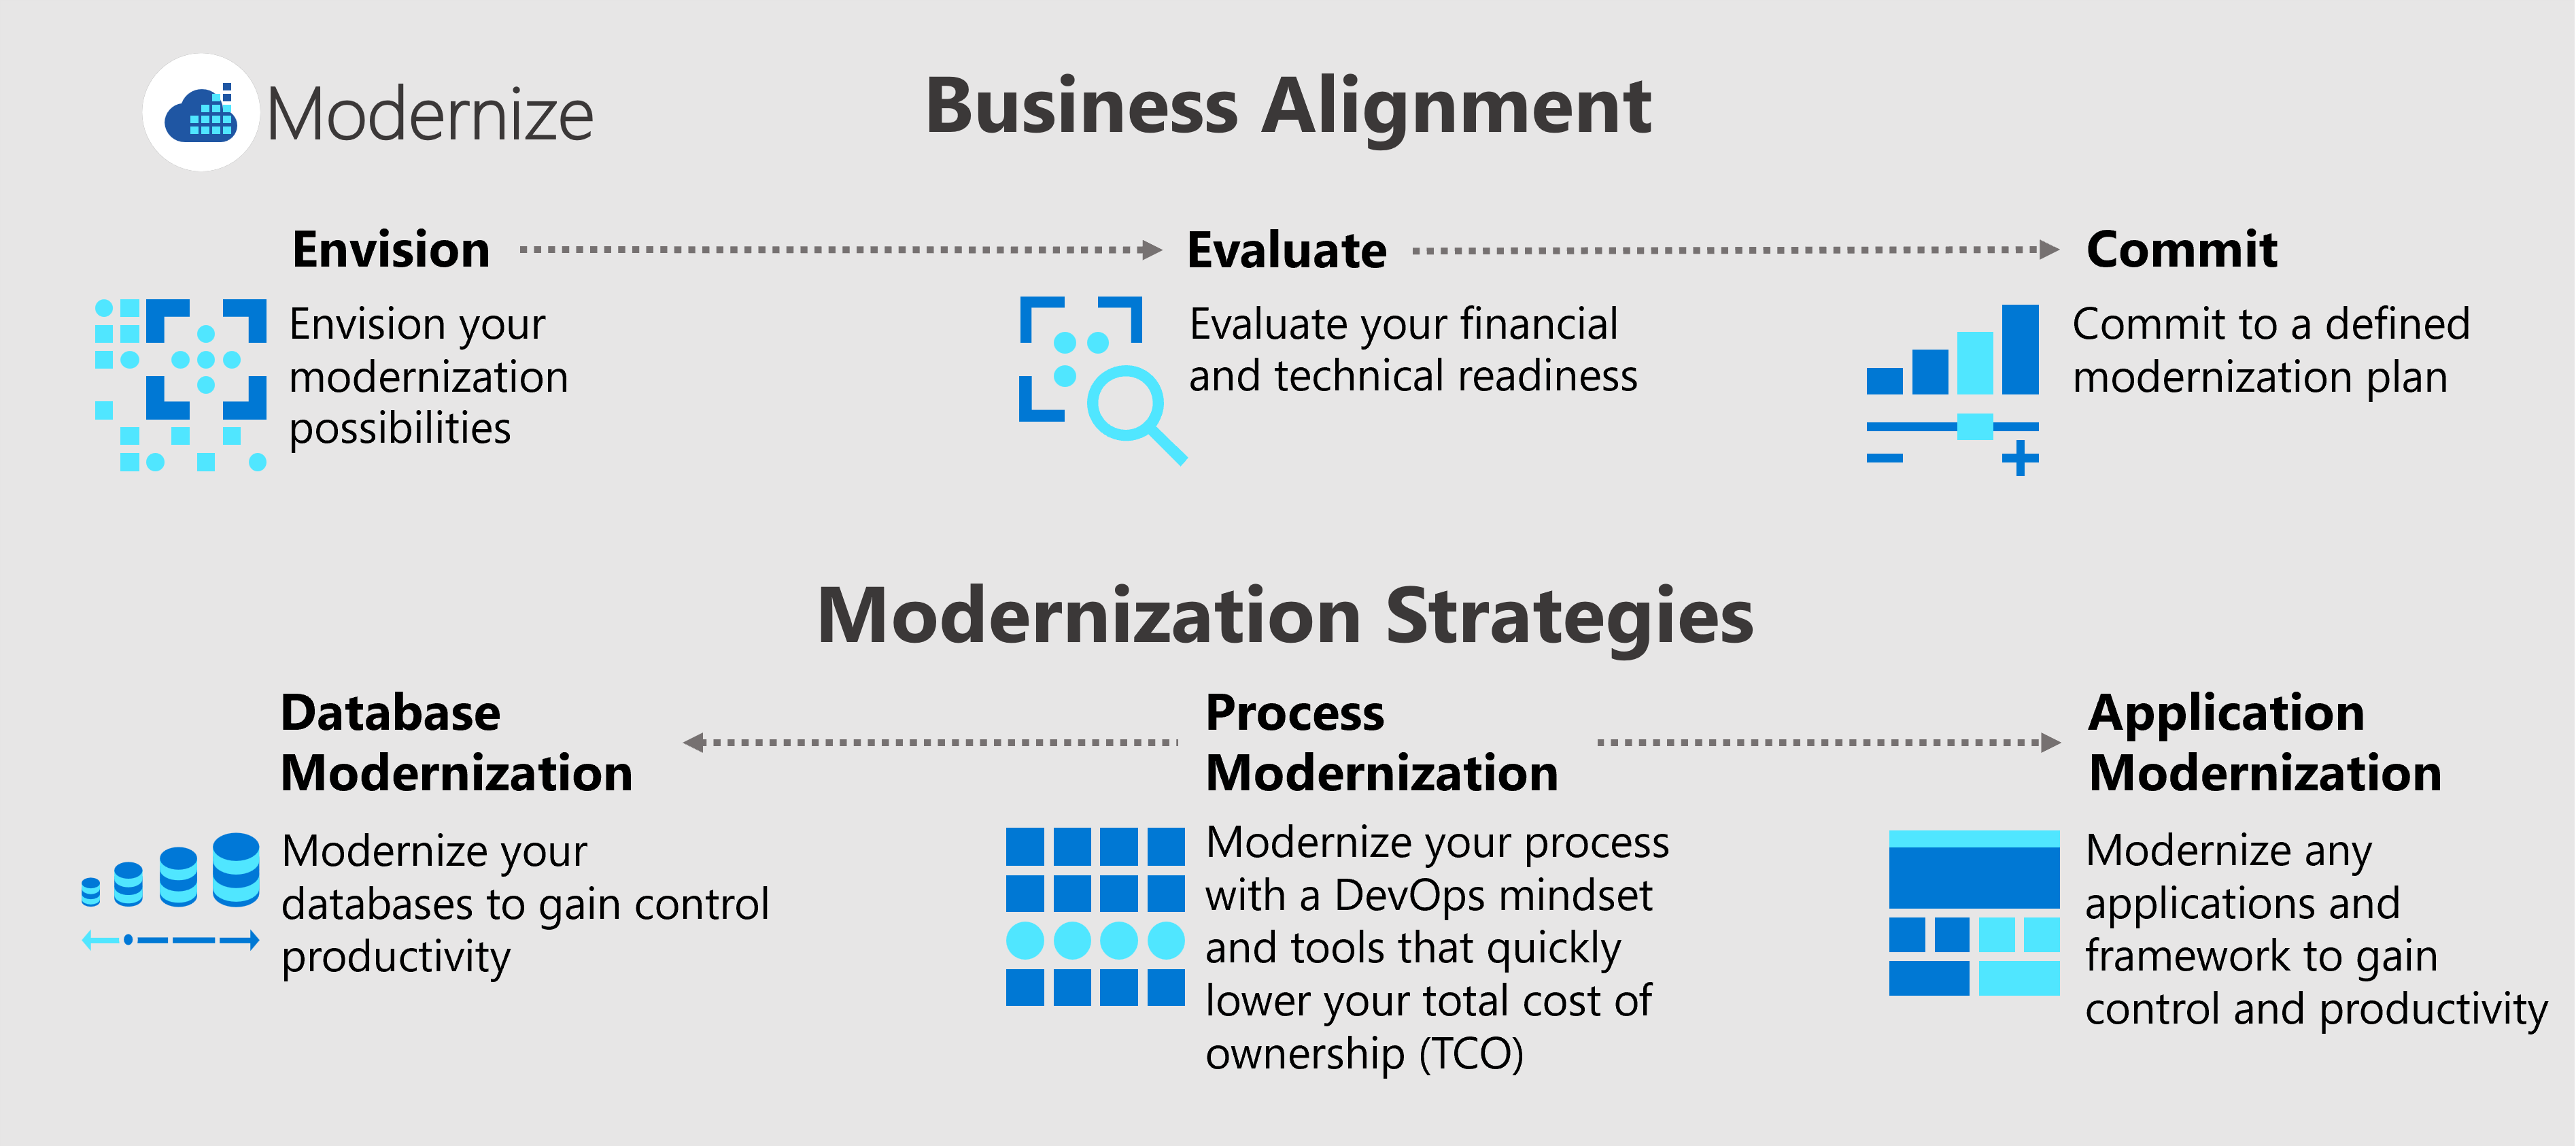 Diagram that shows three business alignment processes (envision, evaluate, and commit) and three modernization strategies (process, application, and database modernization).